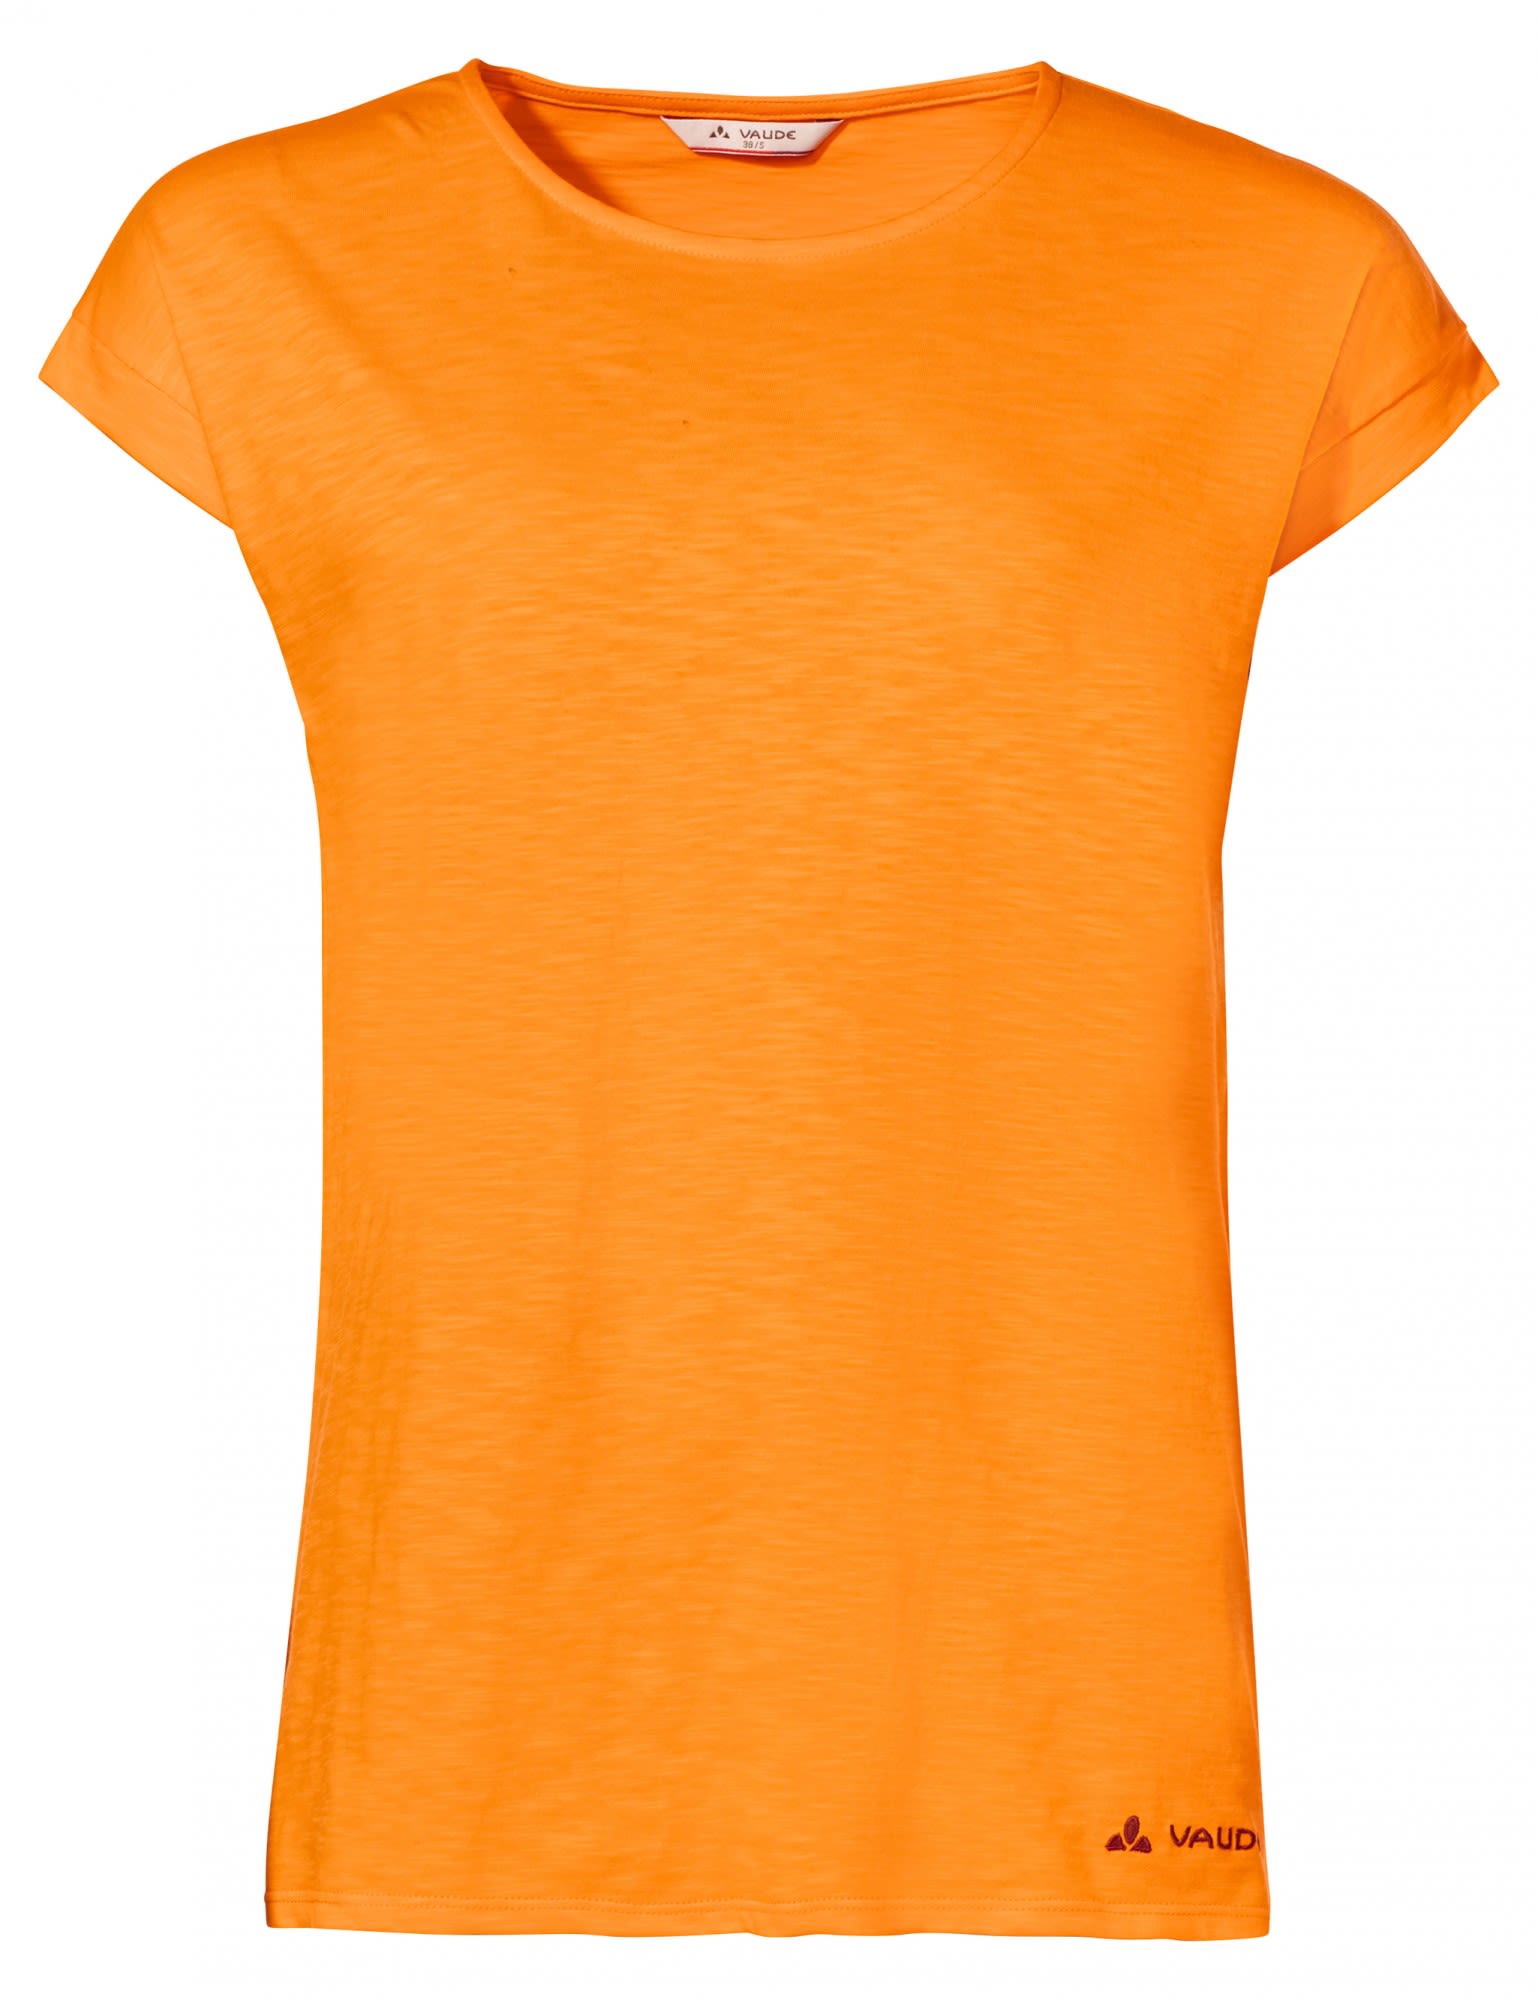 Vaude Opening Sales Womens comfortable easy-care organic cotton t-shirt.  Coupons: 51% off at